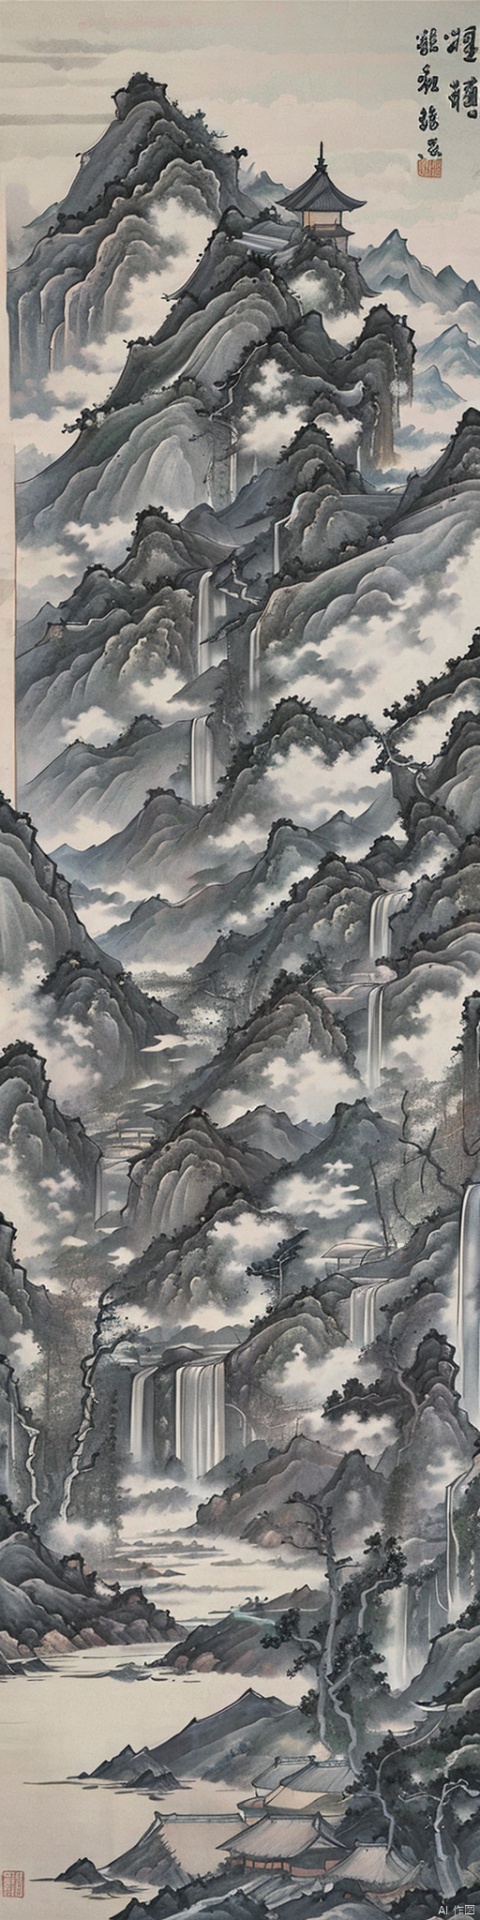  Traditional Chinese landscape painting, Chinese freehand brushwork, Qing Dynasty landscape painter Gong Xian style, mountains, trees, waterfalls, water flow, ink accumulation method, heavy,vast国画